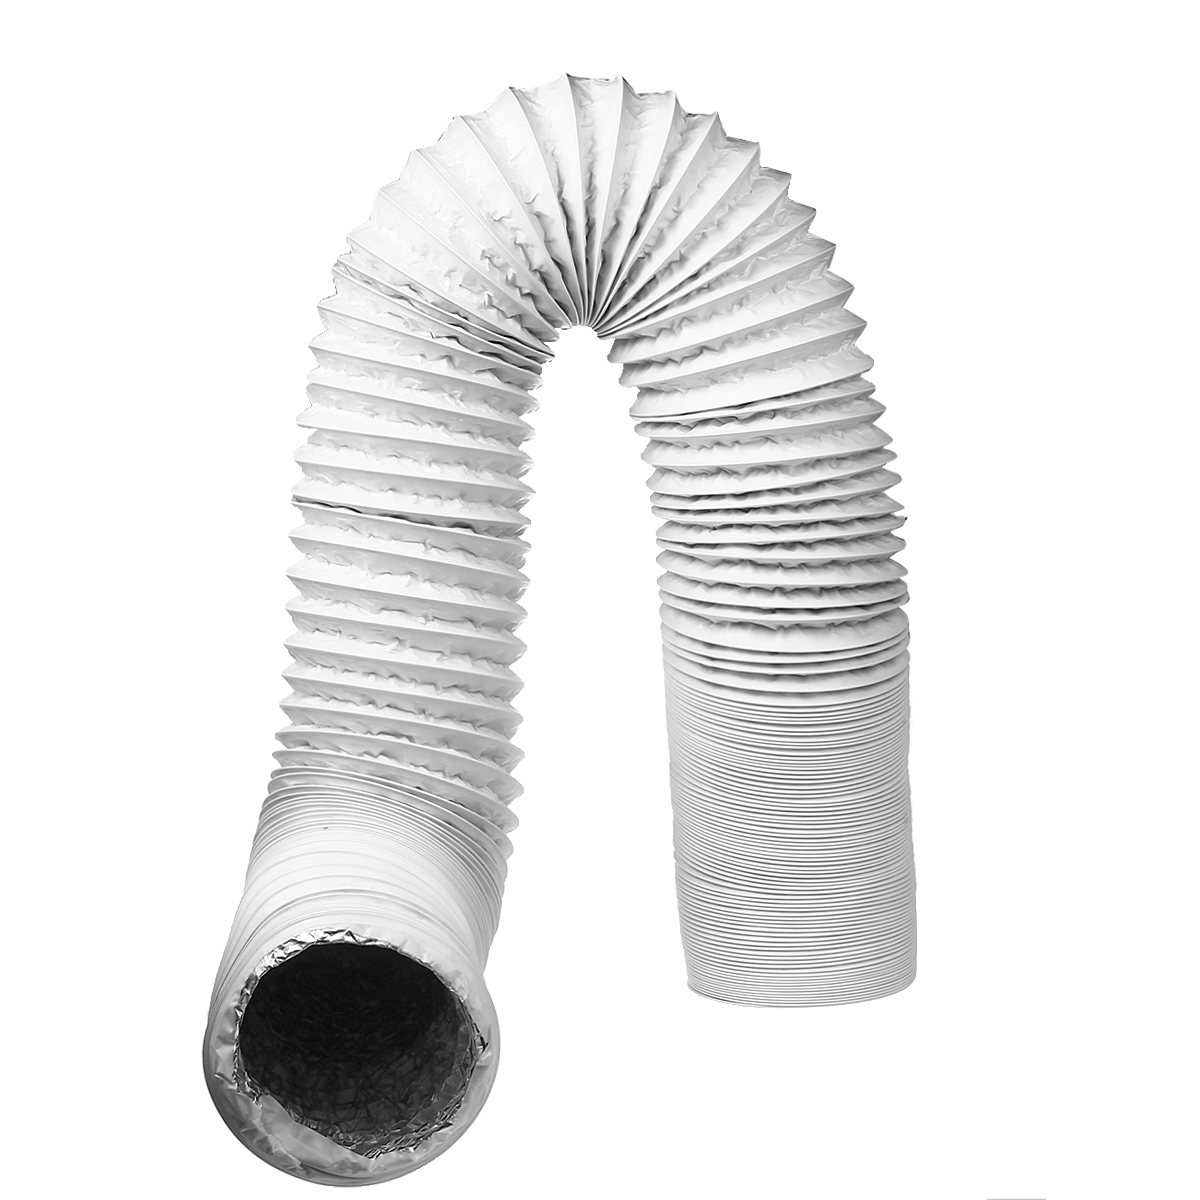 DIA15cm6-Inch-6M-Flexible-Air-Conditioner-Exhaust-Hose-For-Portable-Air-Conditioner-1556013-3